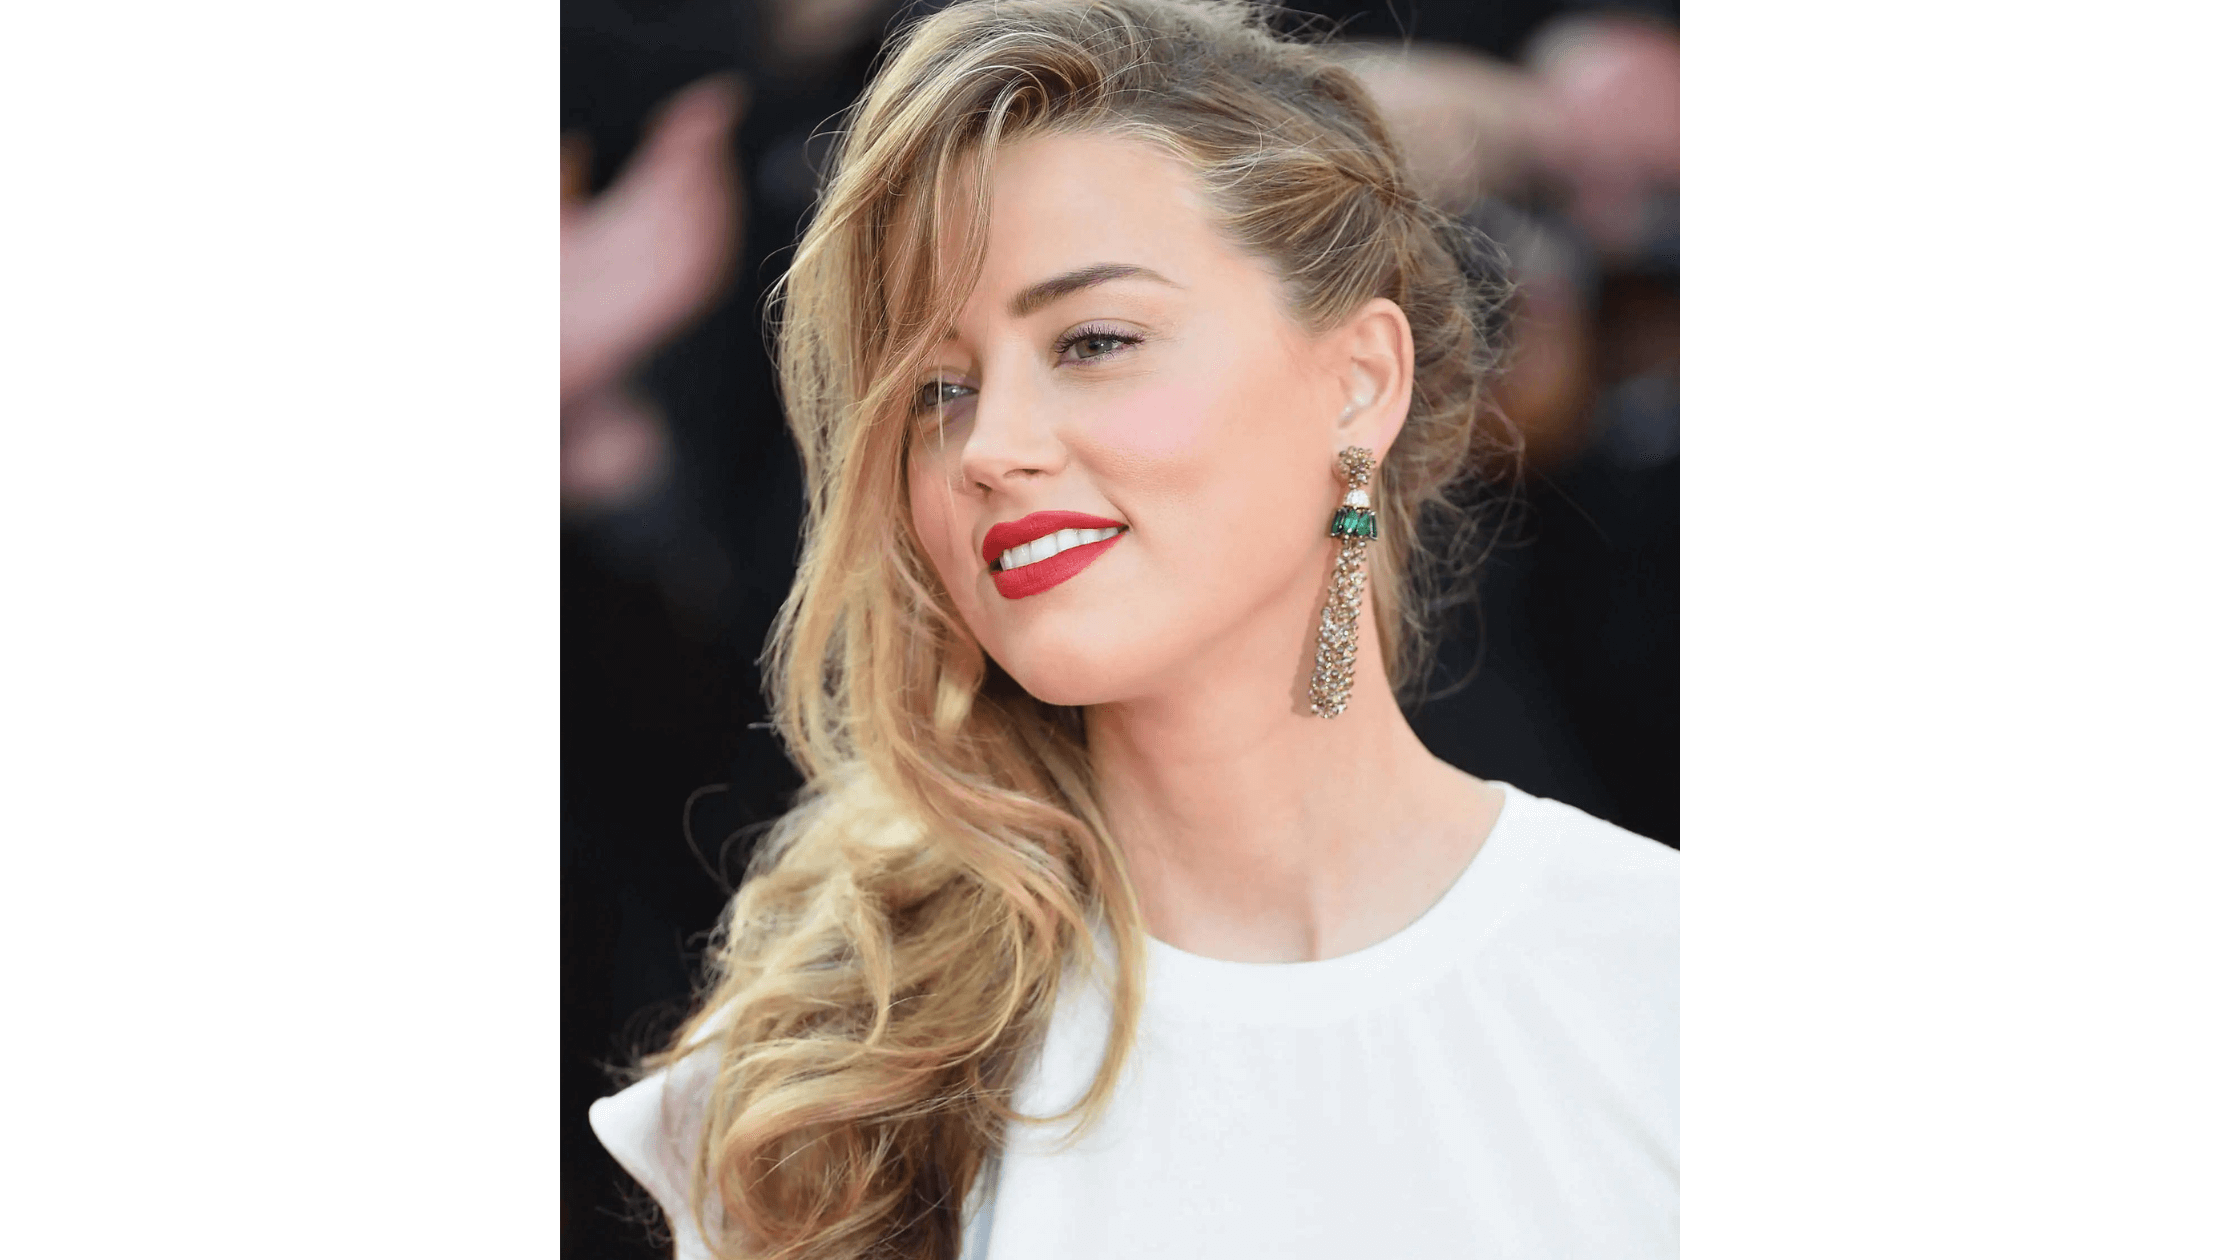 Hackers Rename Amber Heard's IMDb Page "Amber Turd" In An Attempt To Steal Her Identity